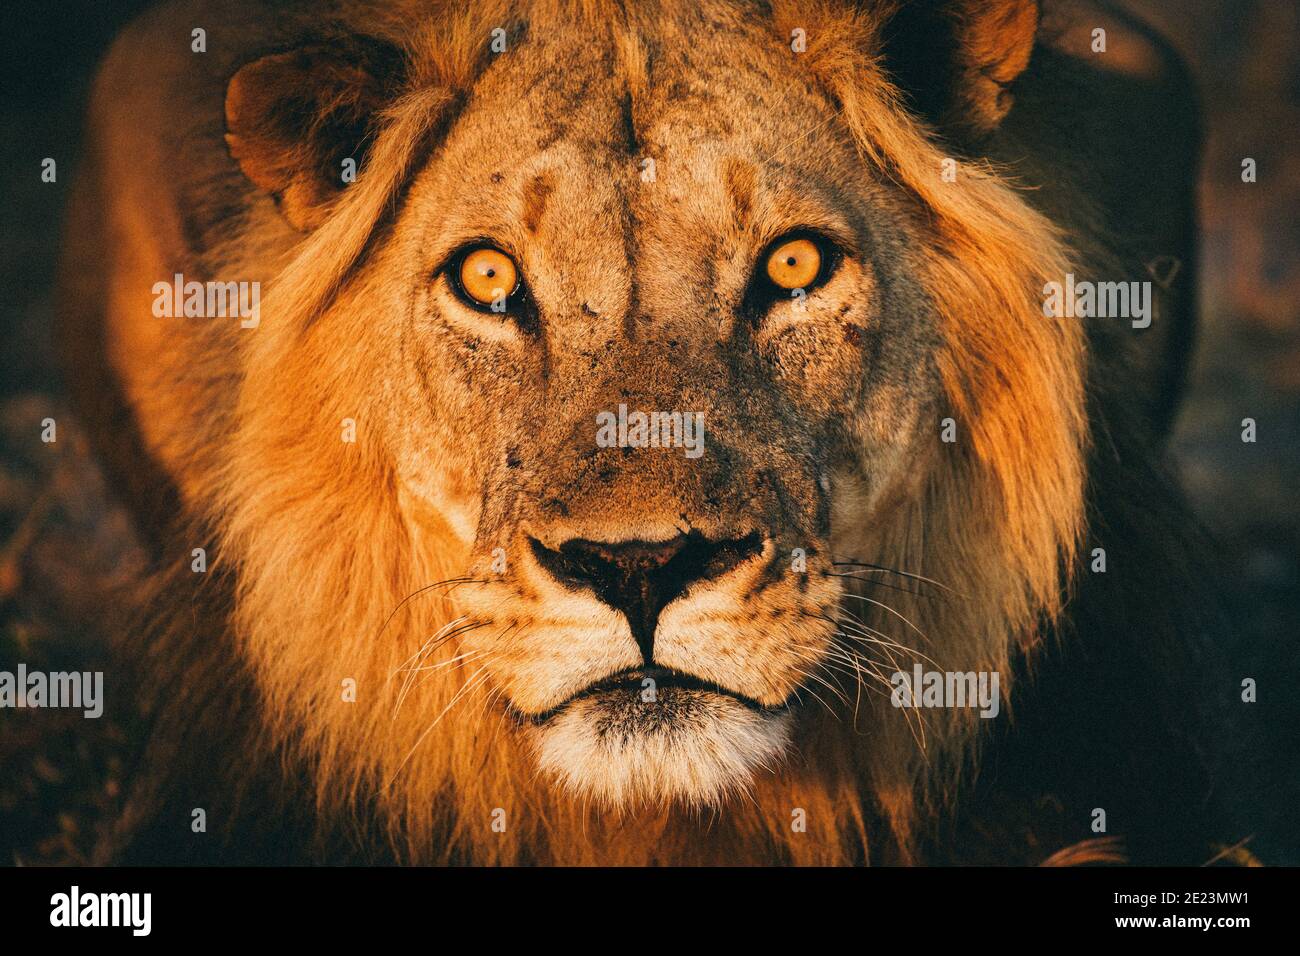 Lion starring at the camera with a fierce look Stock Photo